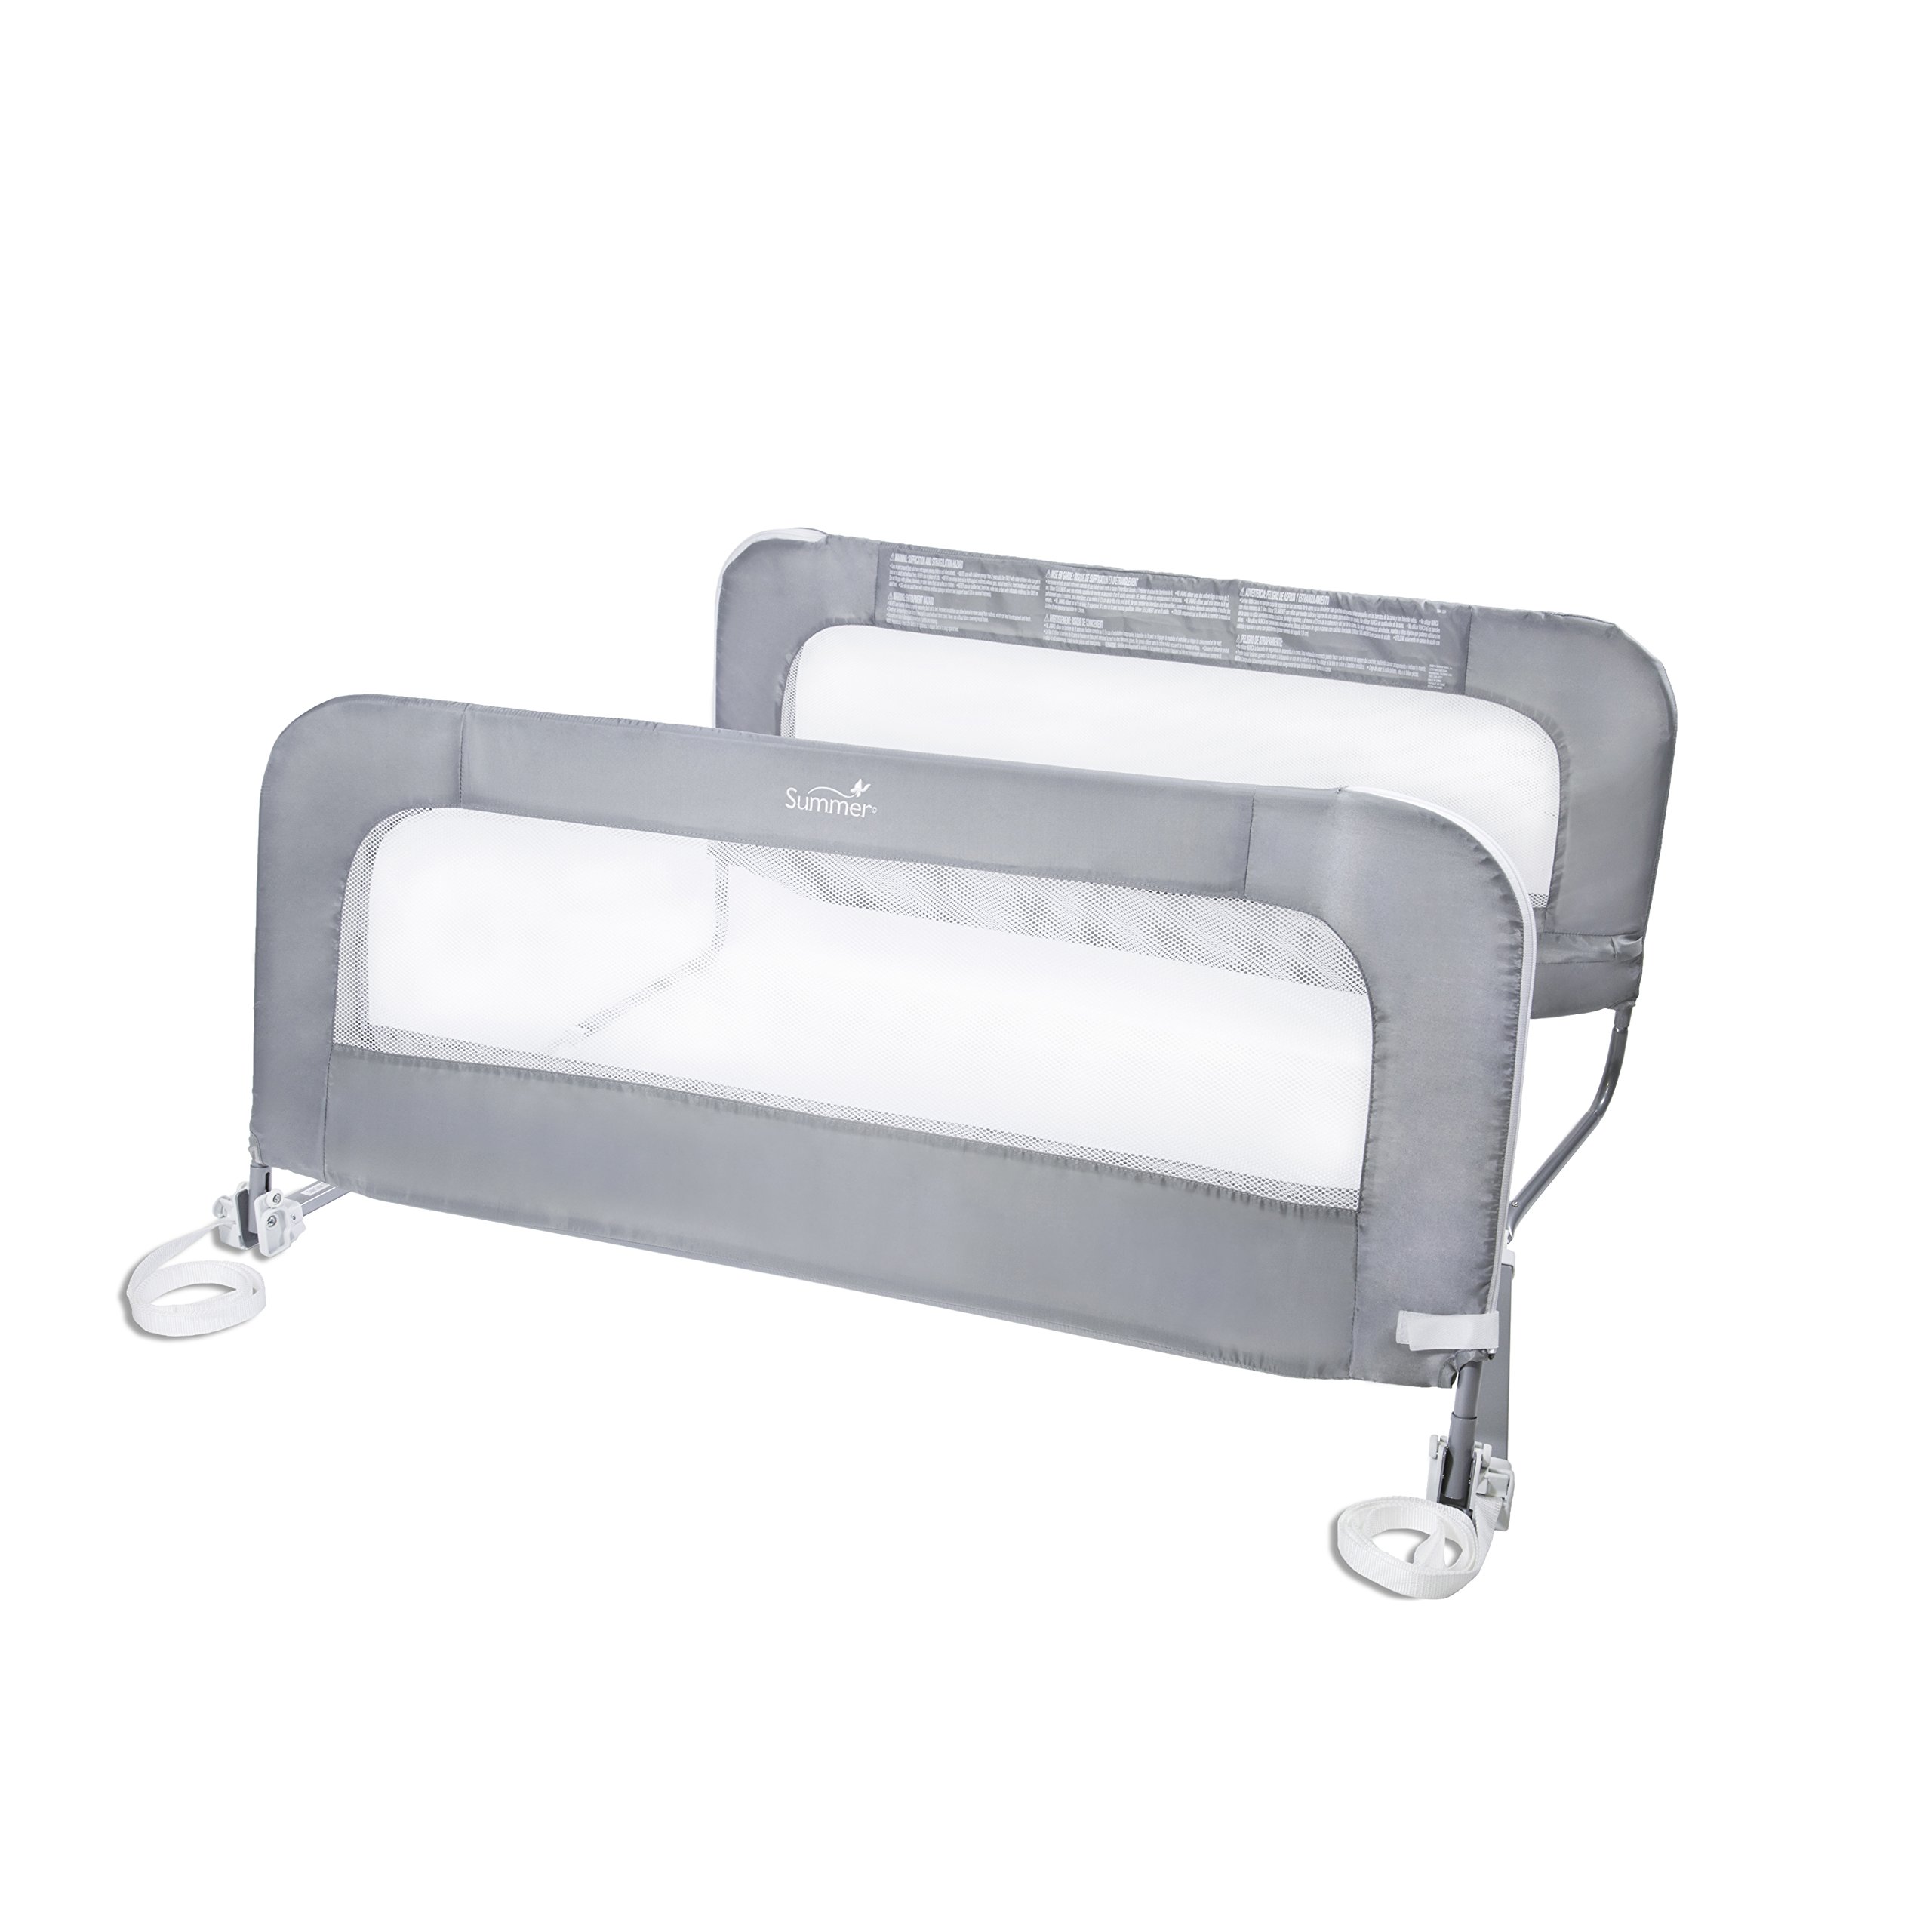 toddler bed safety rail reviews